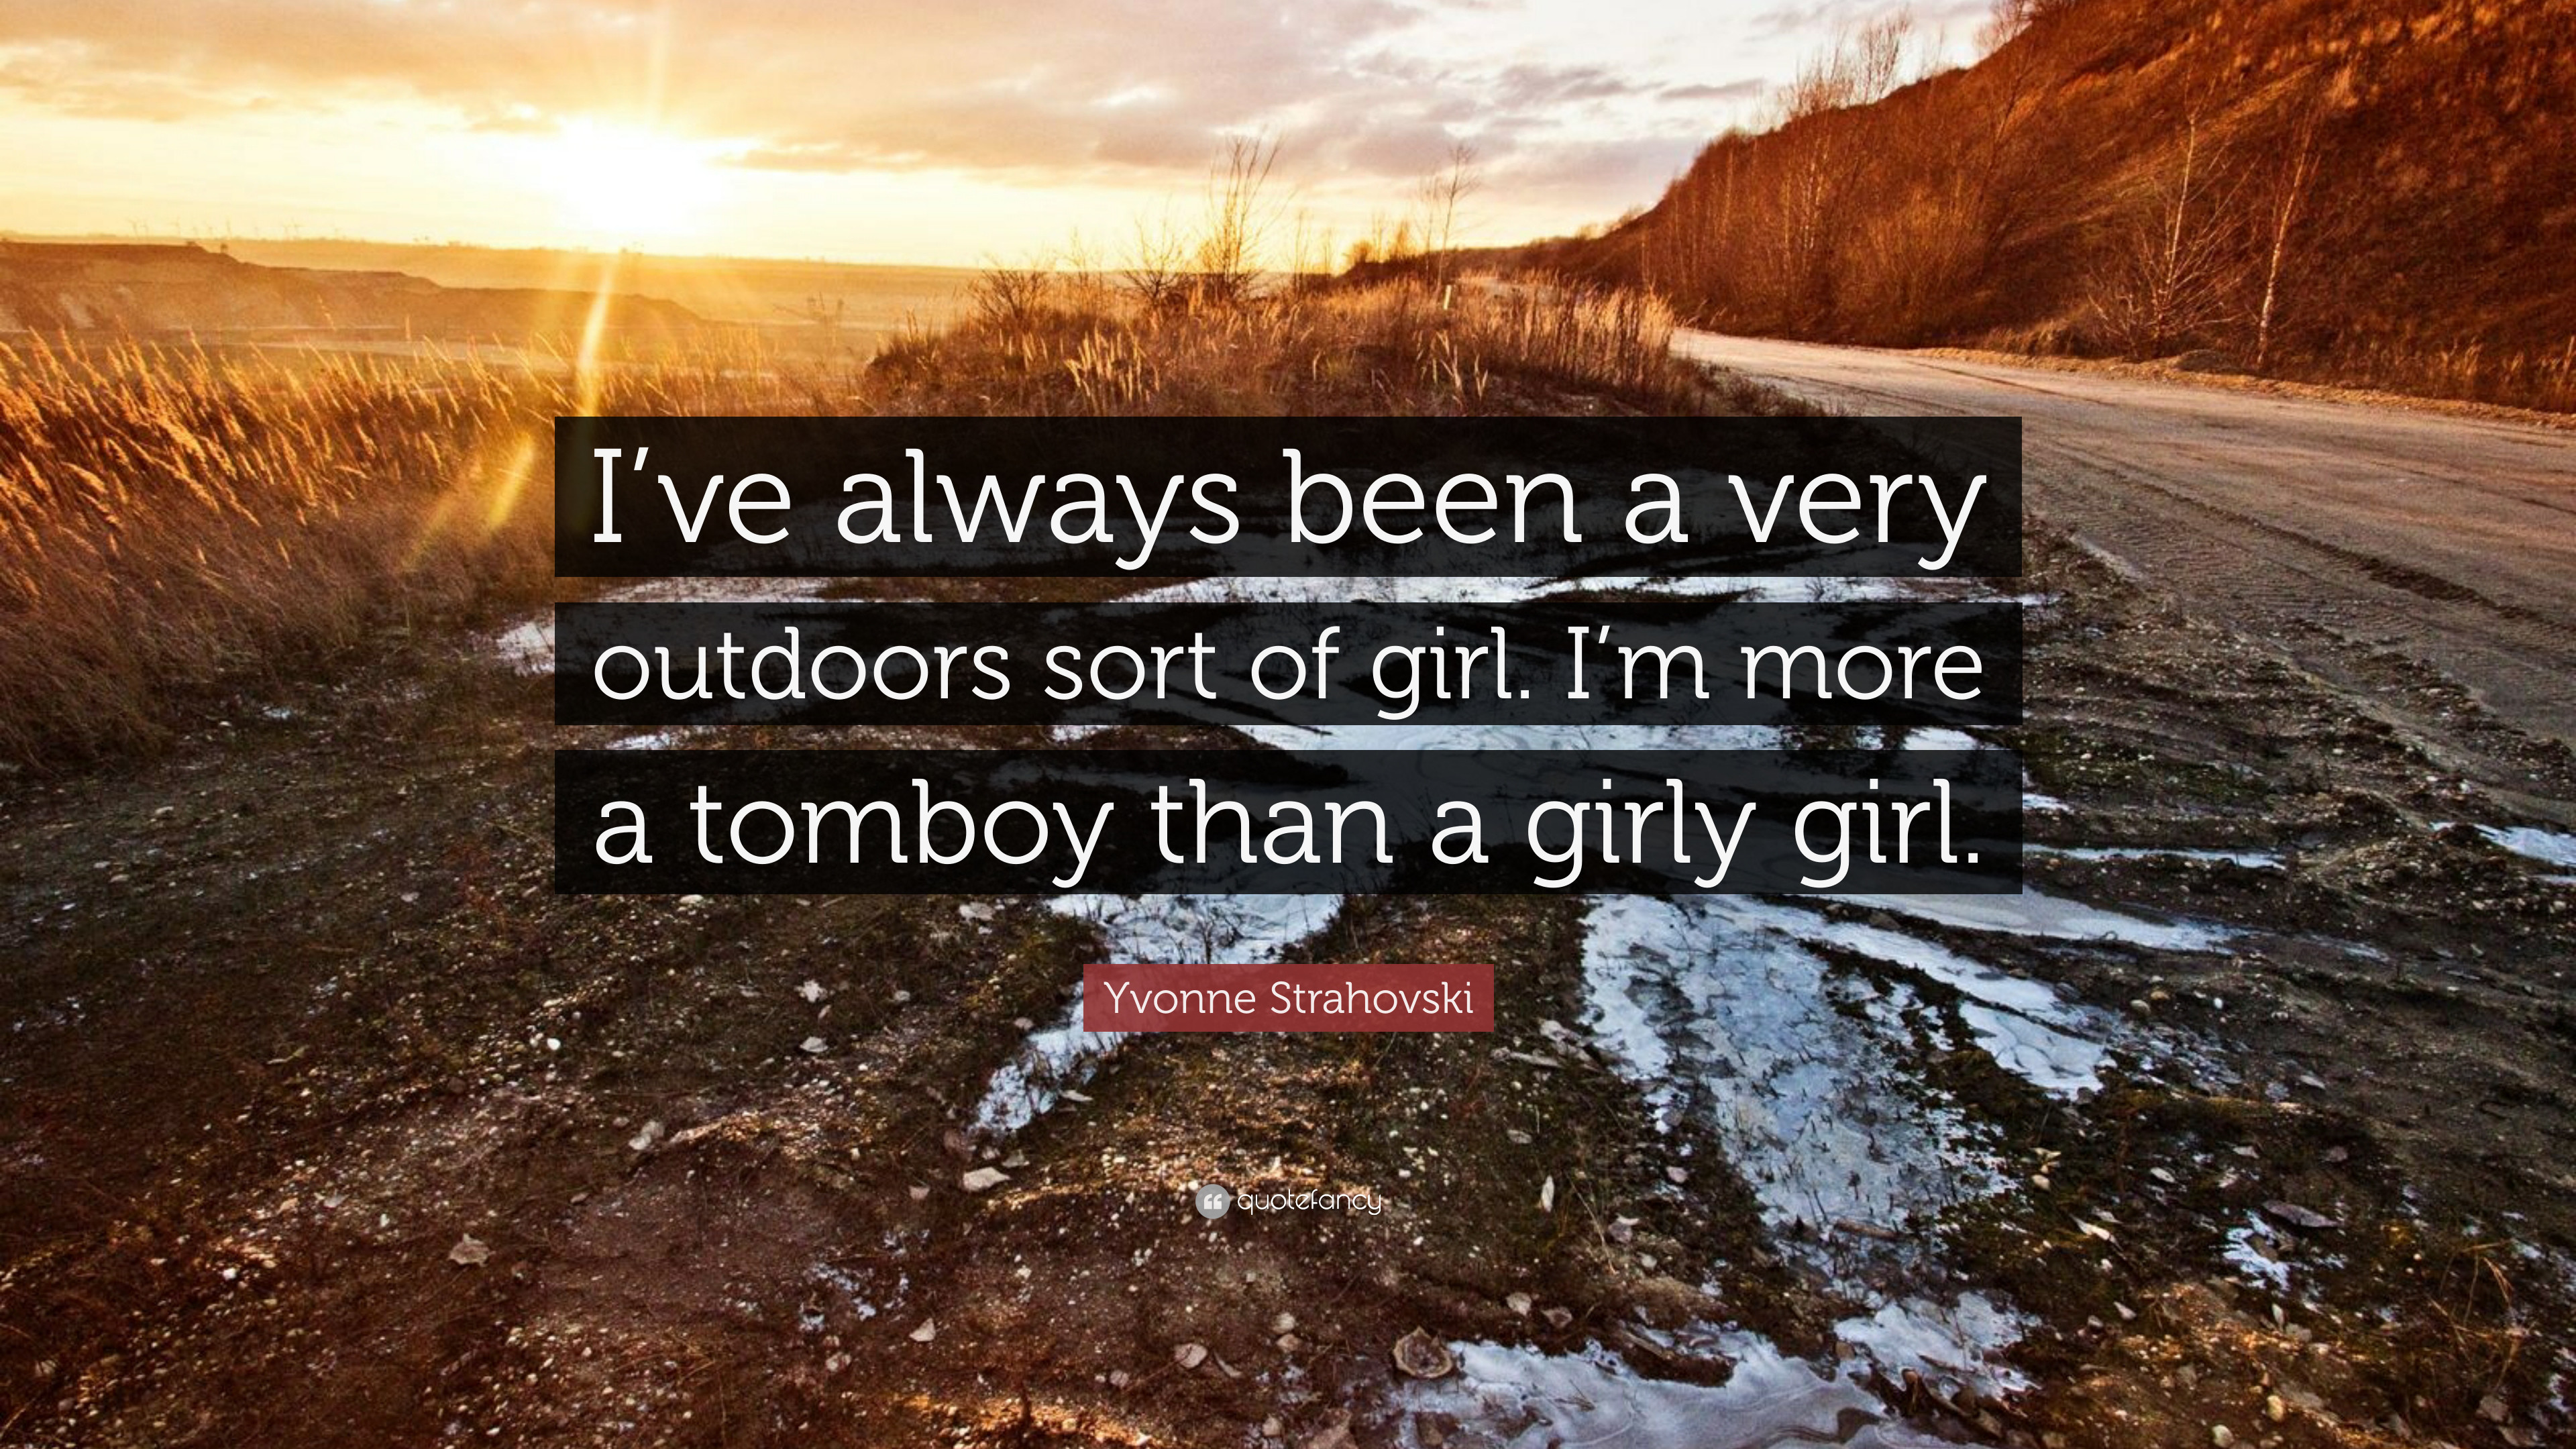 3840x2160 7 wallpapers. Yvonne Strahovski Quote: “I've always been a very outdoors  sort of girl